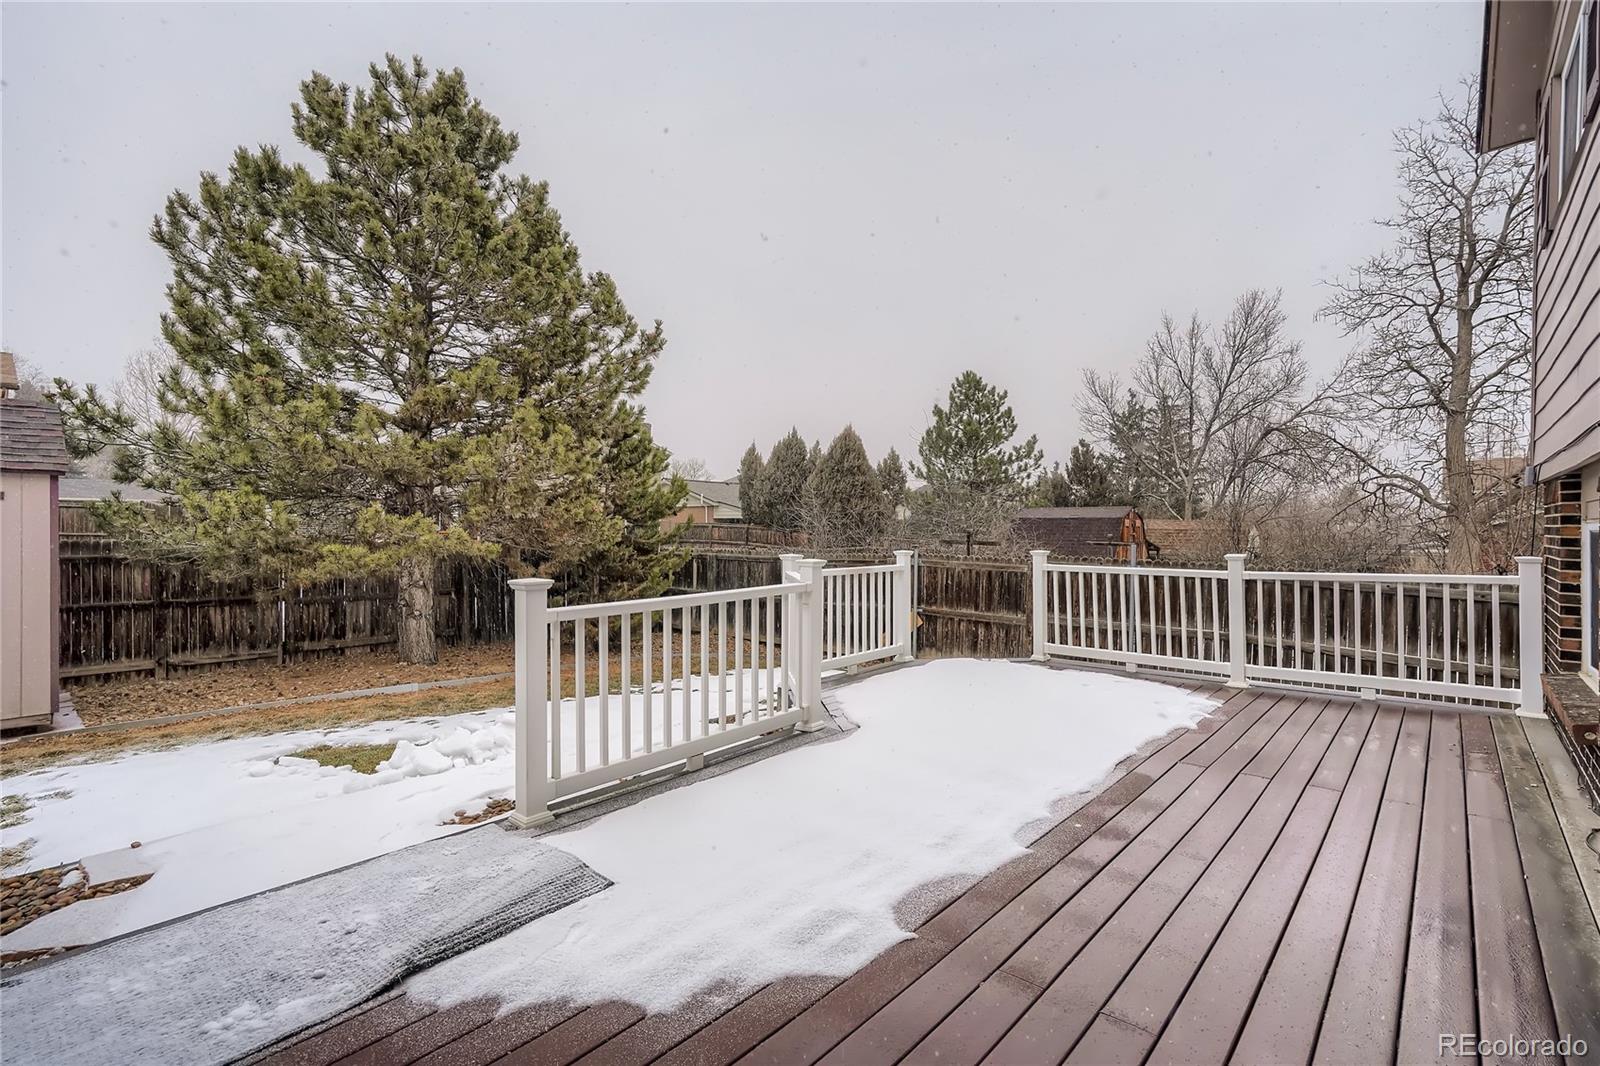 6321 108th, Westminster, CO